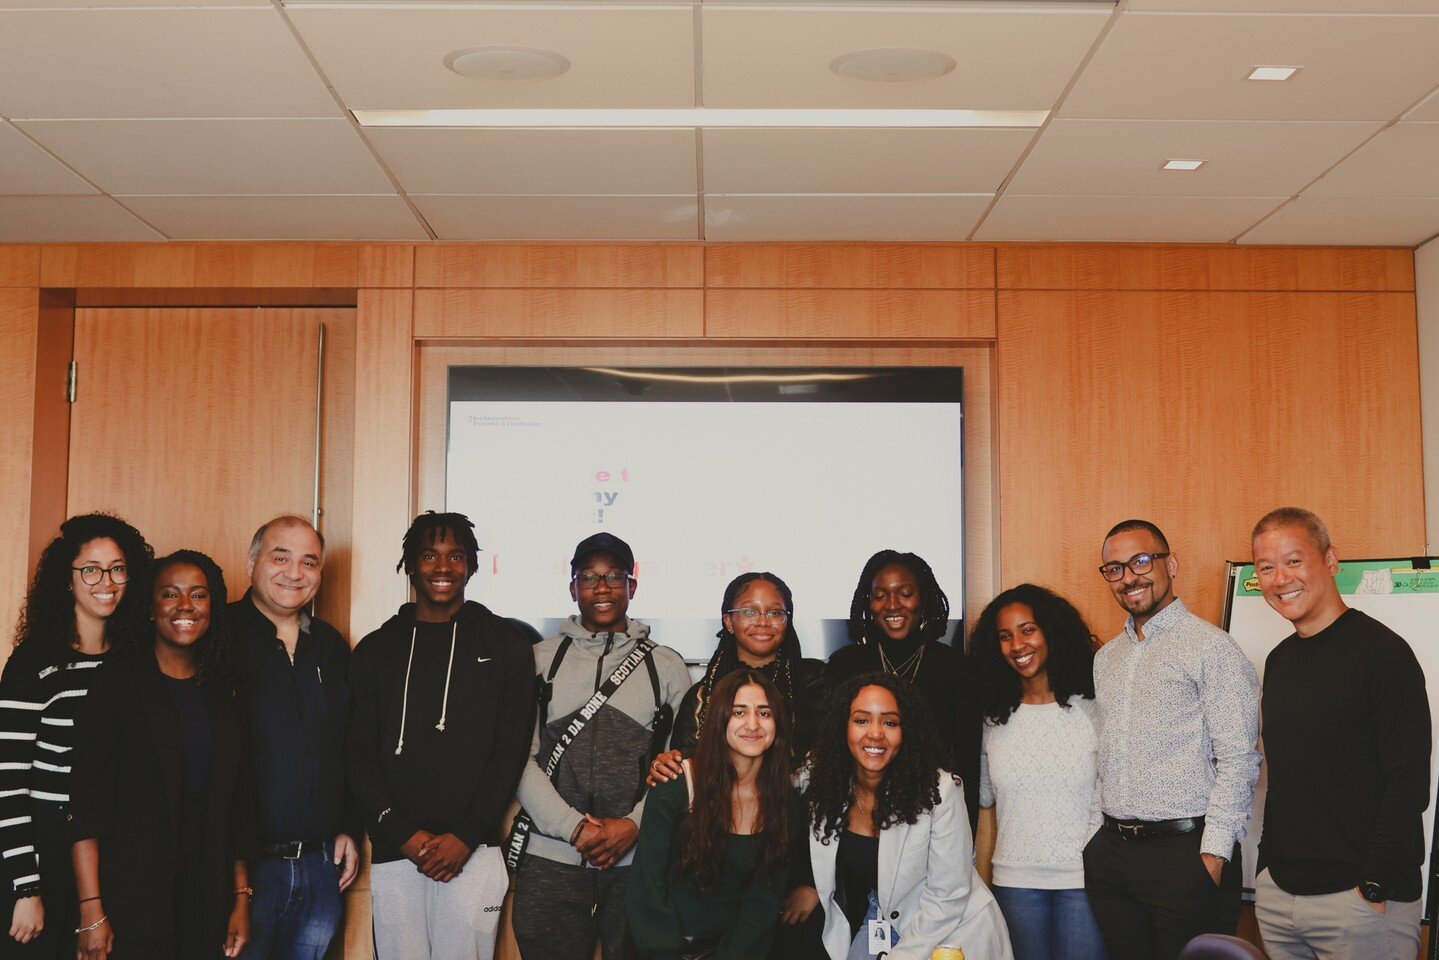 Thank you to Level&rsquo;s Premier Partner, @mccarthytetrault,  who hosted the students of Emery Collegiate&rsquo;s Law class, as a part of the Black Youth Justice Program (BYJP) at Level. The BYJP is an innovative justice education program for Black